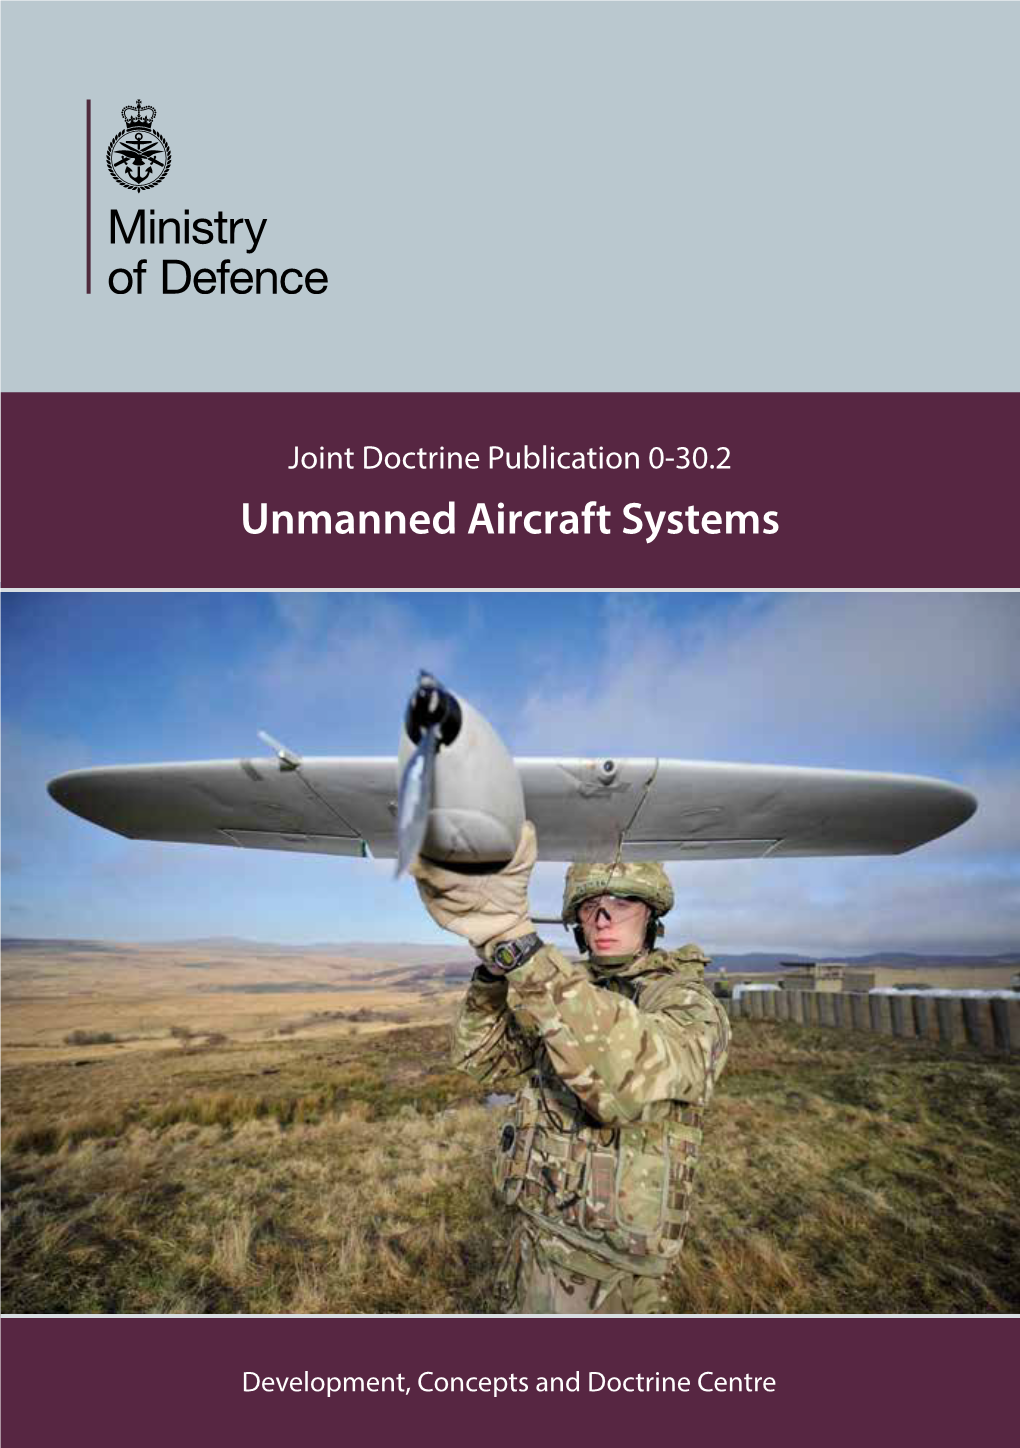 JDP 0-30.2, Unmanned Aircraft Systems (Change 1)